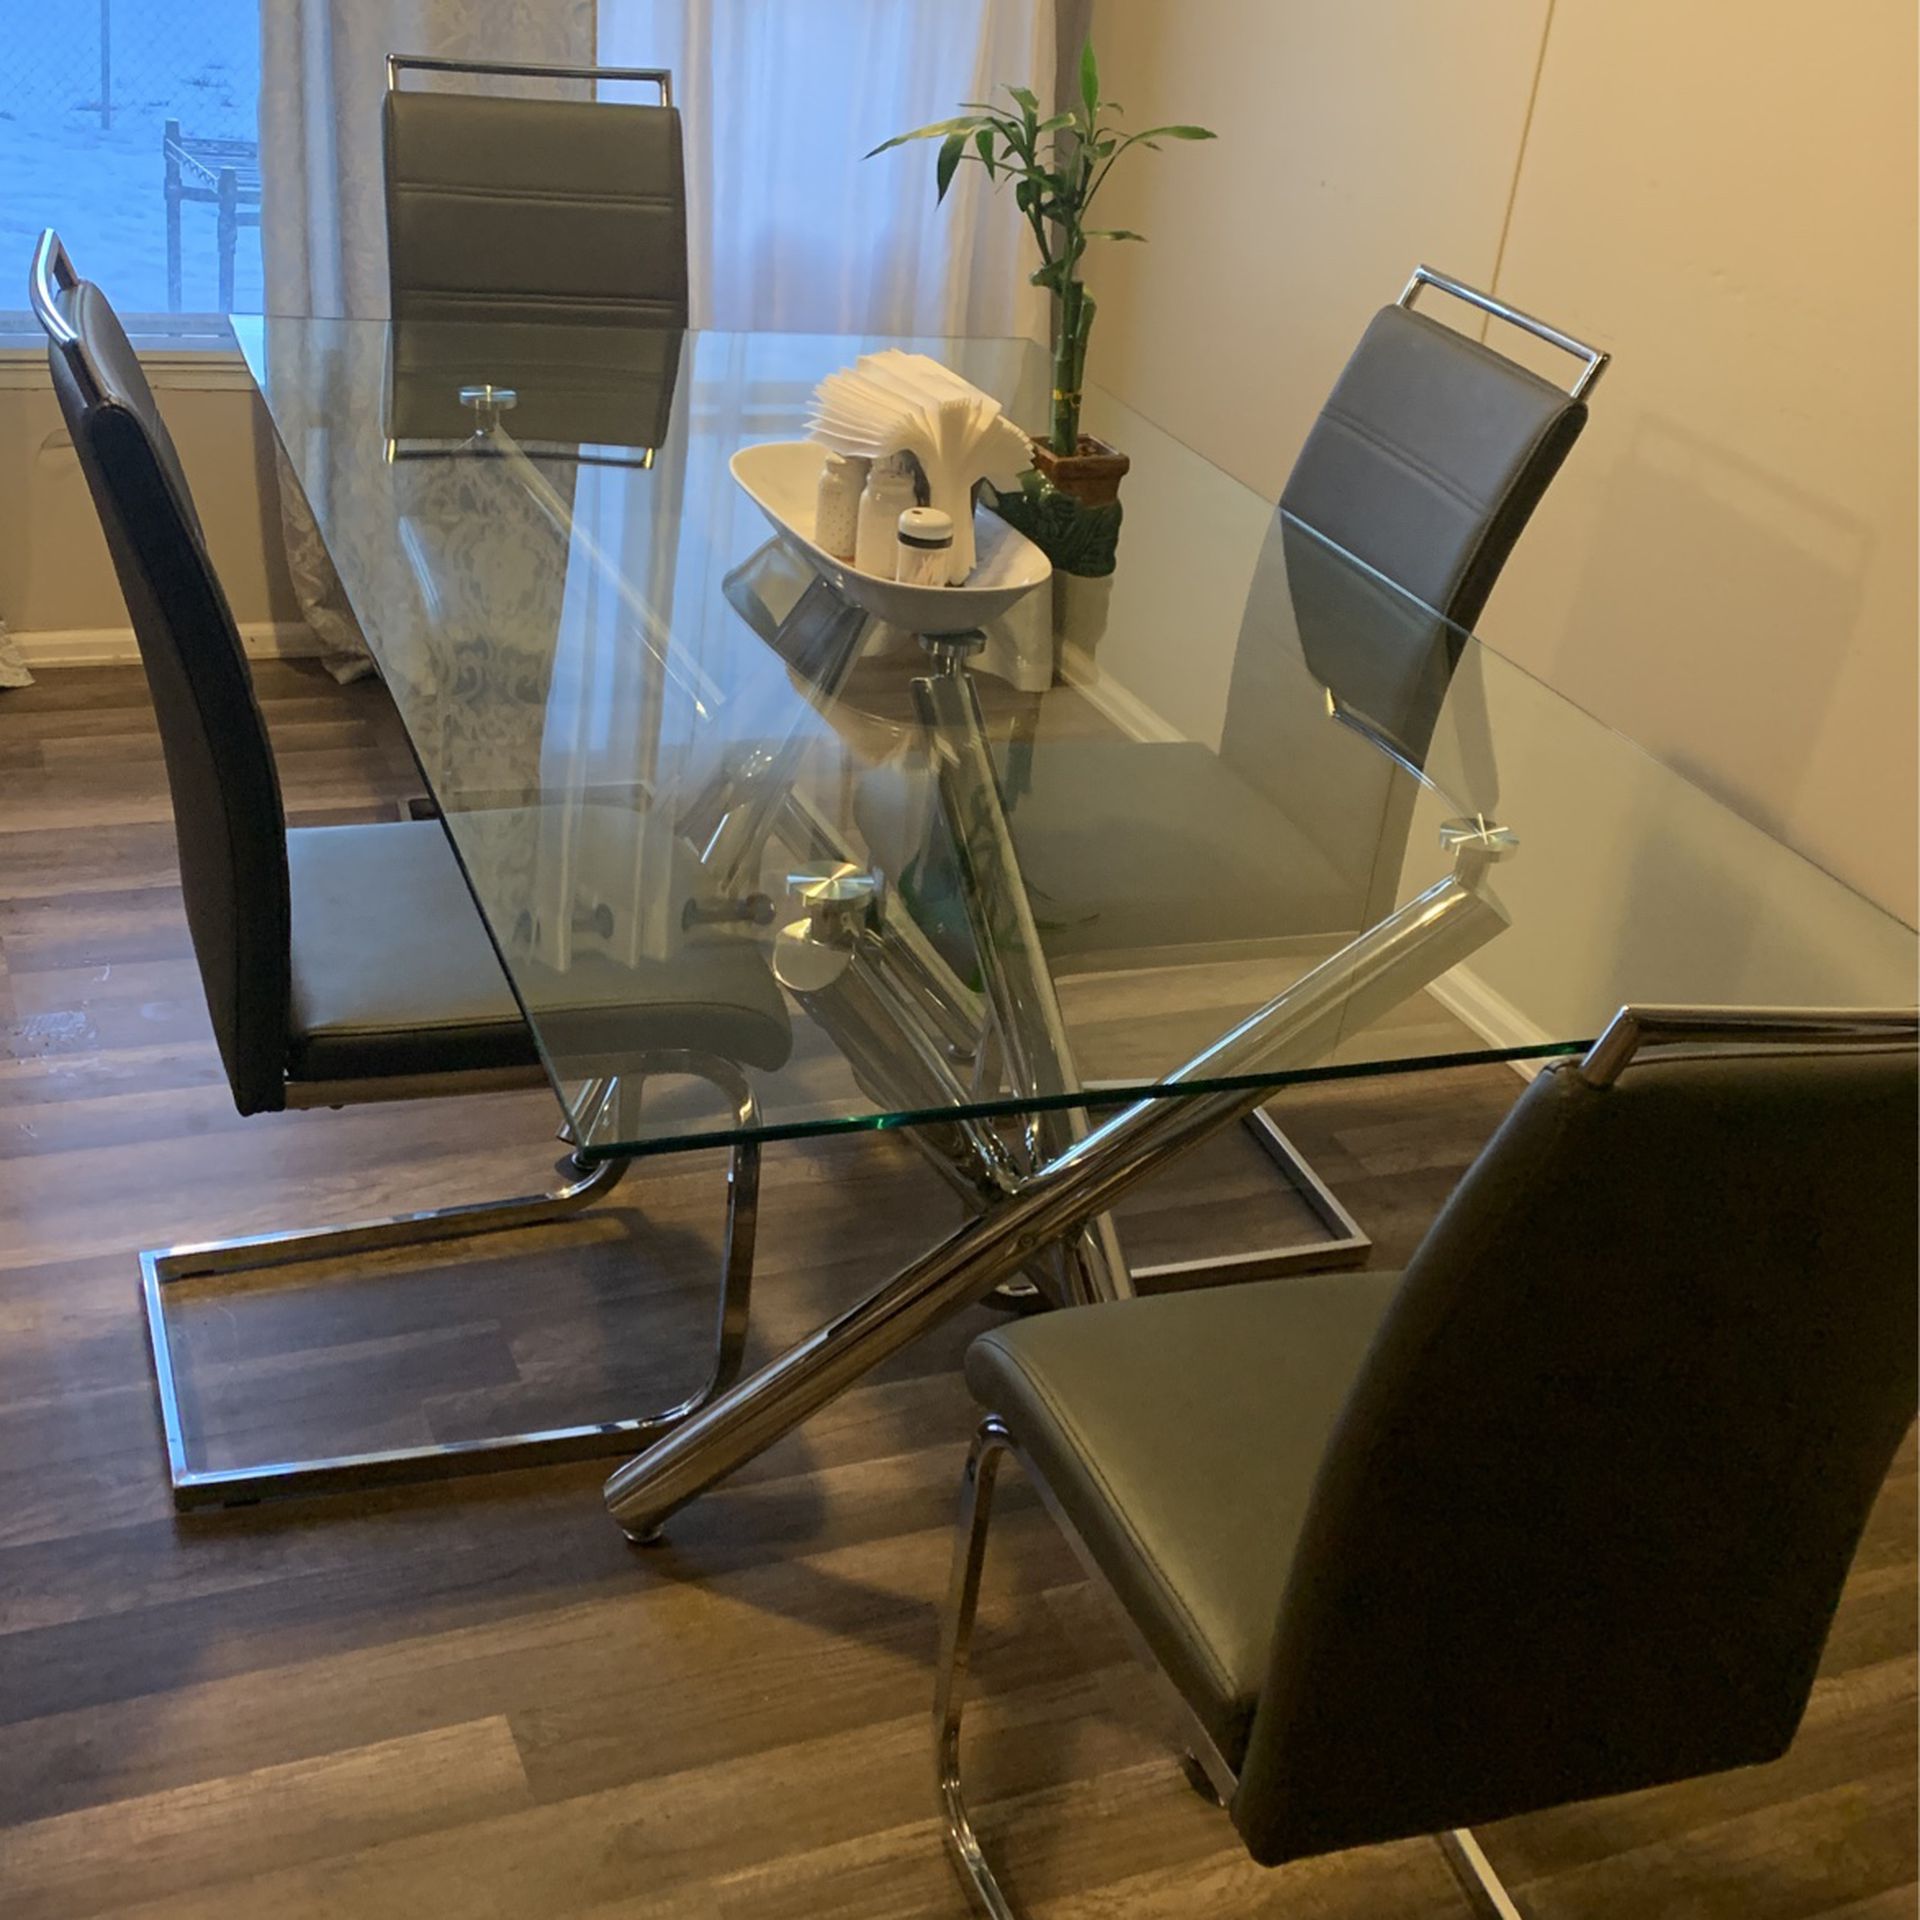 Glass table with 4 chairs